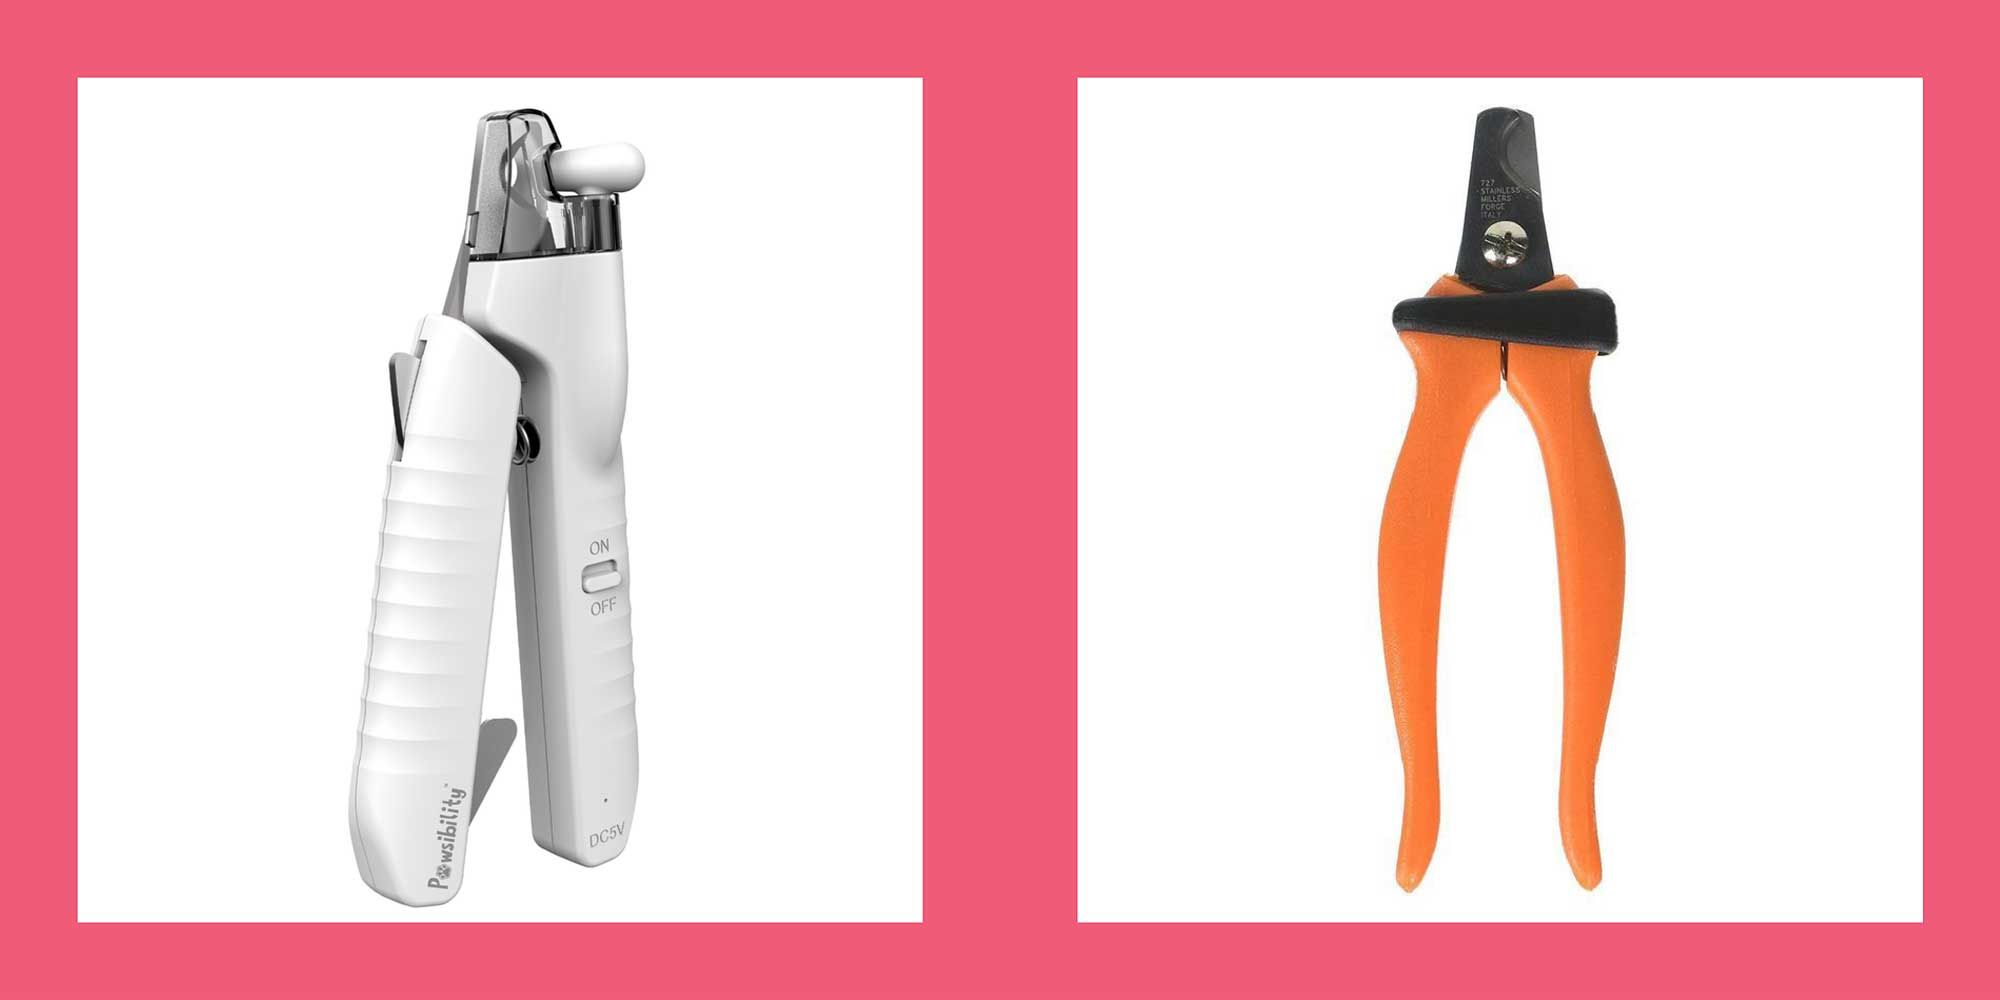 Nail Clippers VS Dremel: Which is better for your dog?